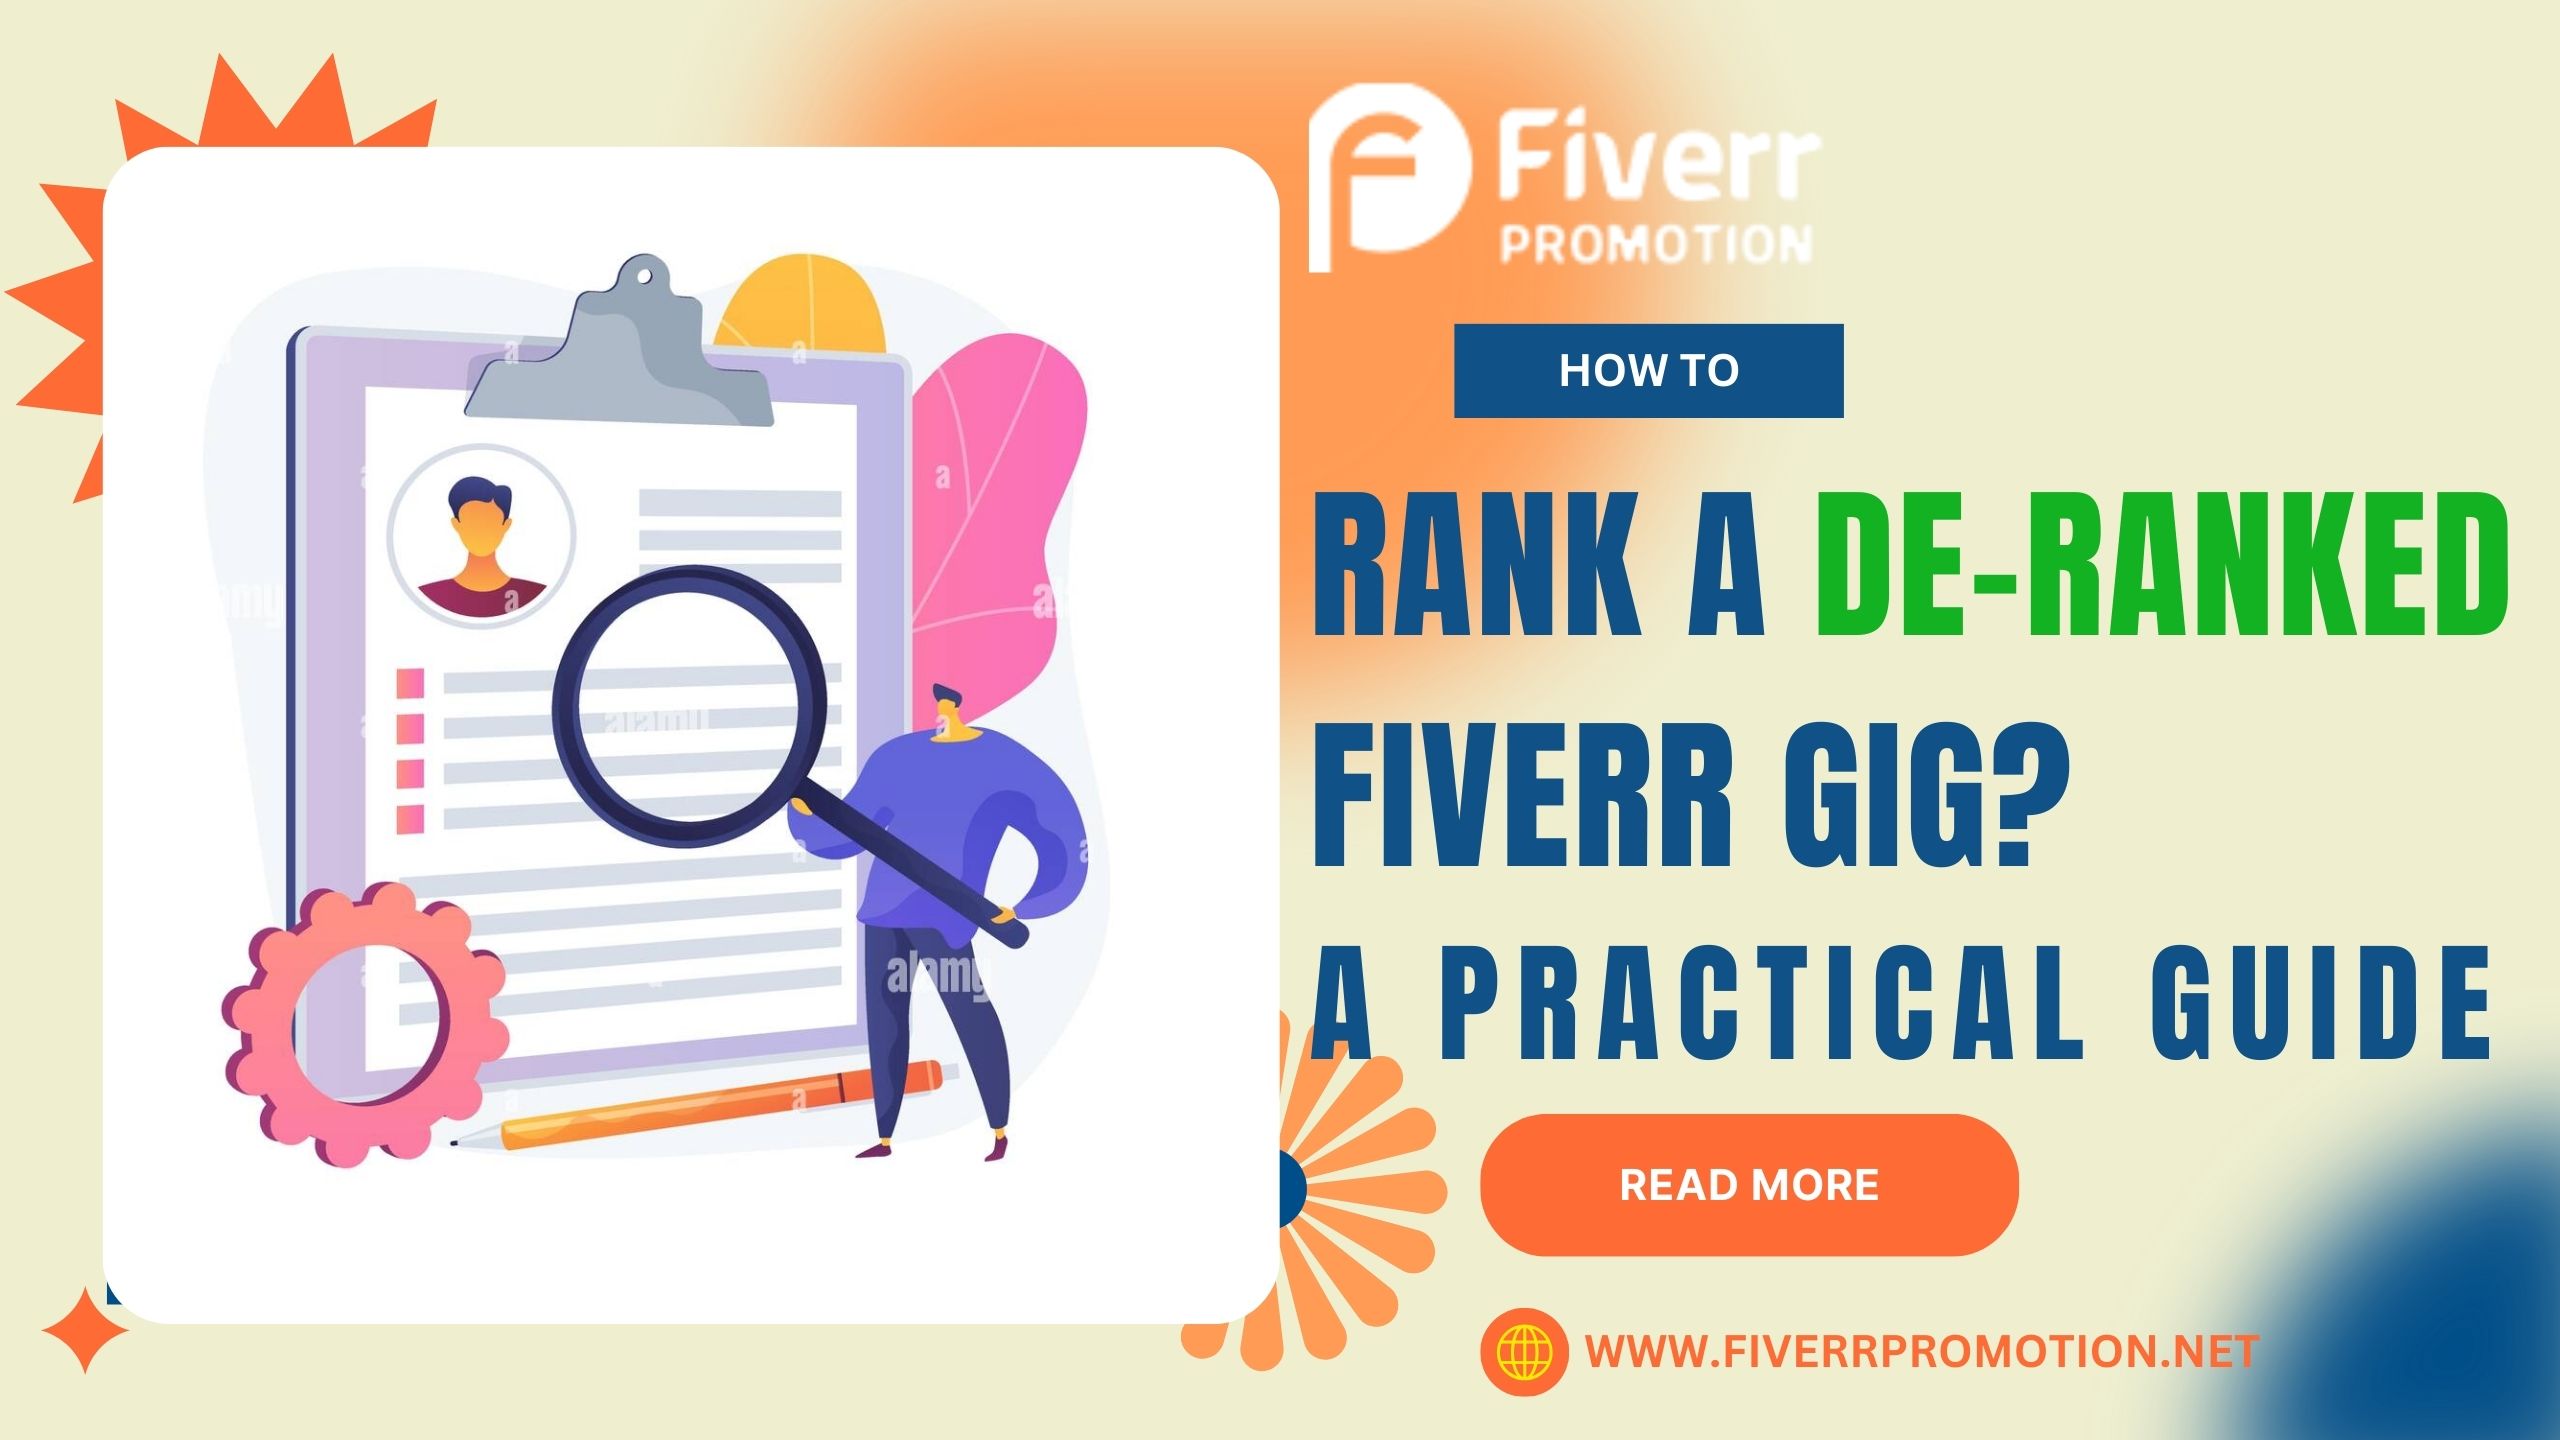 How to Rank a DE-Ranked Fiverr Gig? A Practical Guide